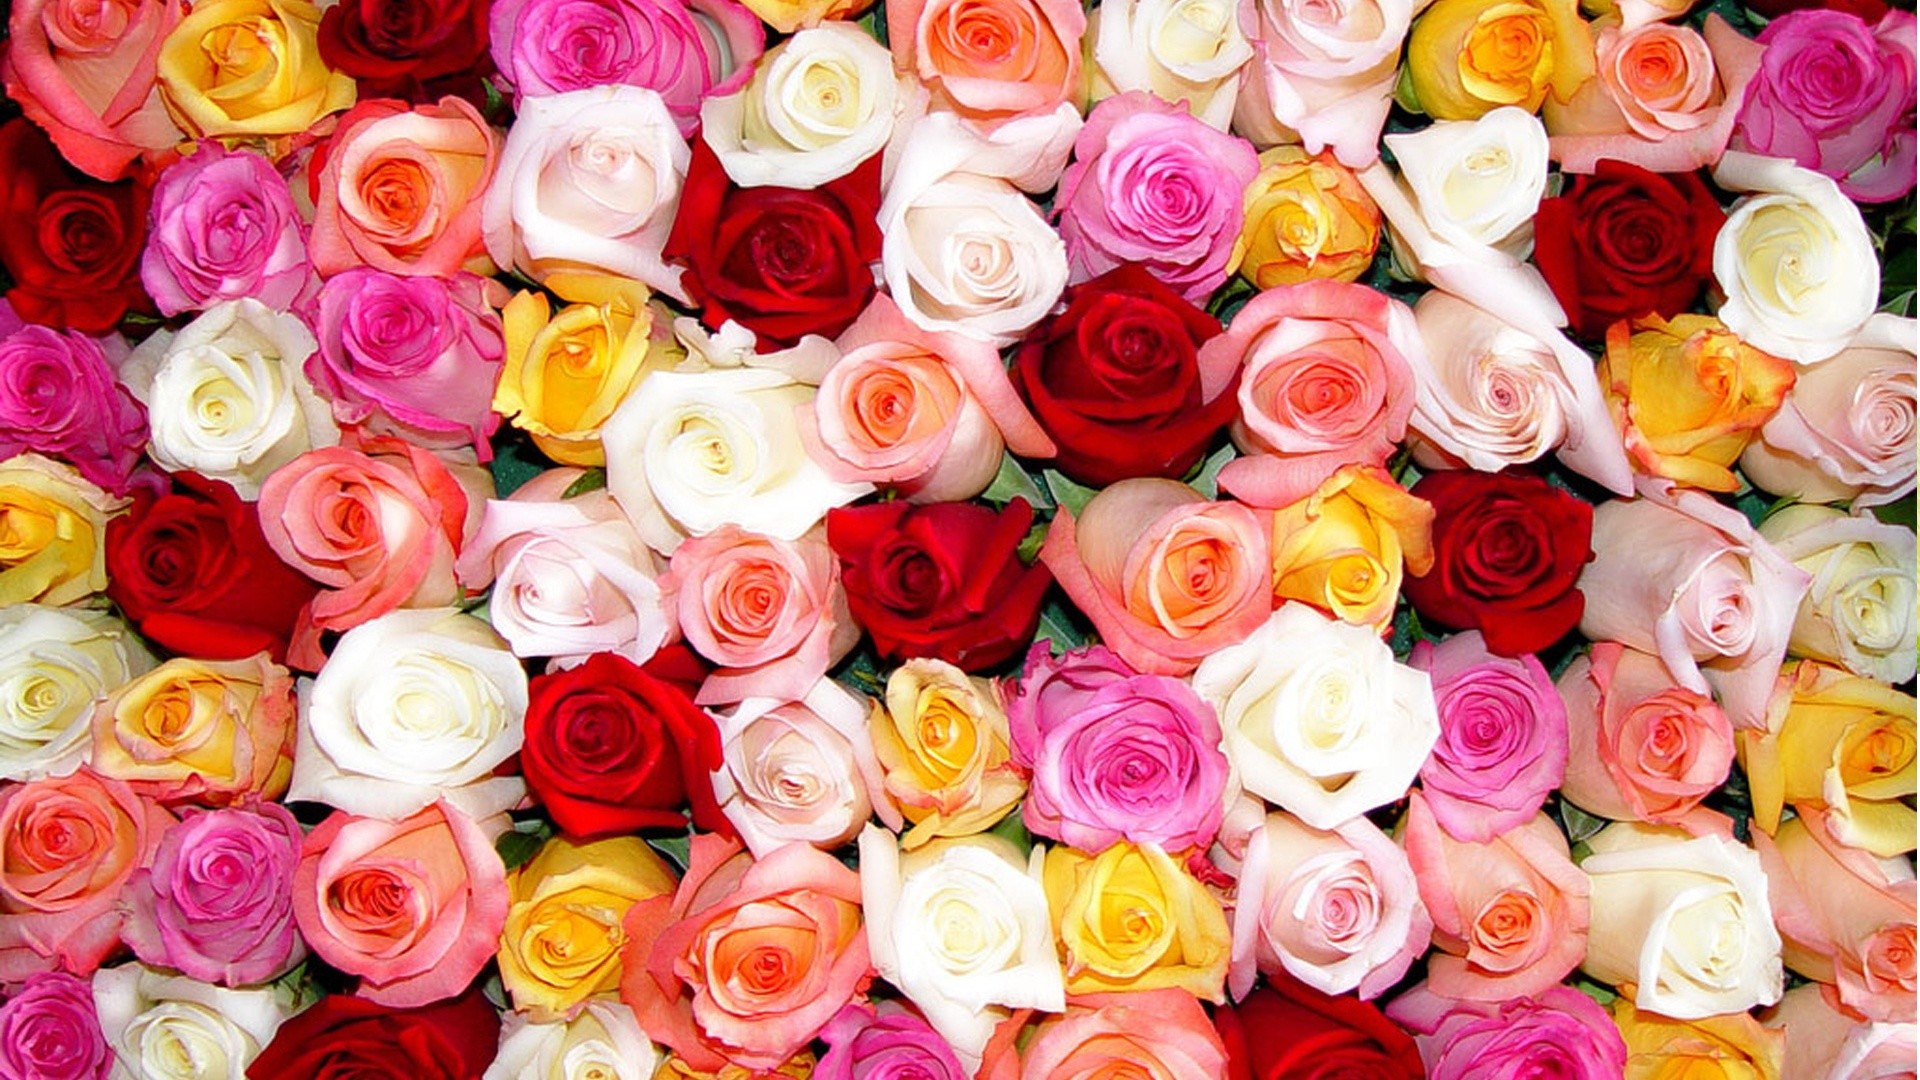 1920x1080 Wallpaper's Collection: Â«Roses WallpapersÂ»